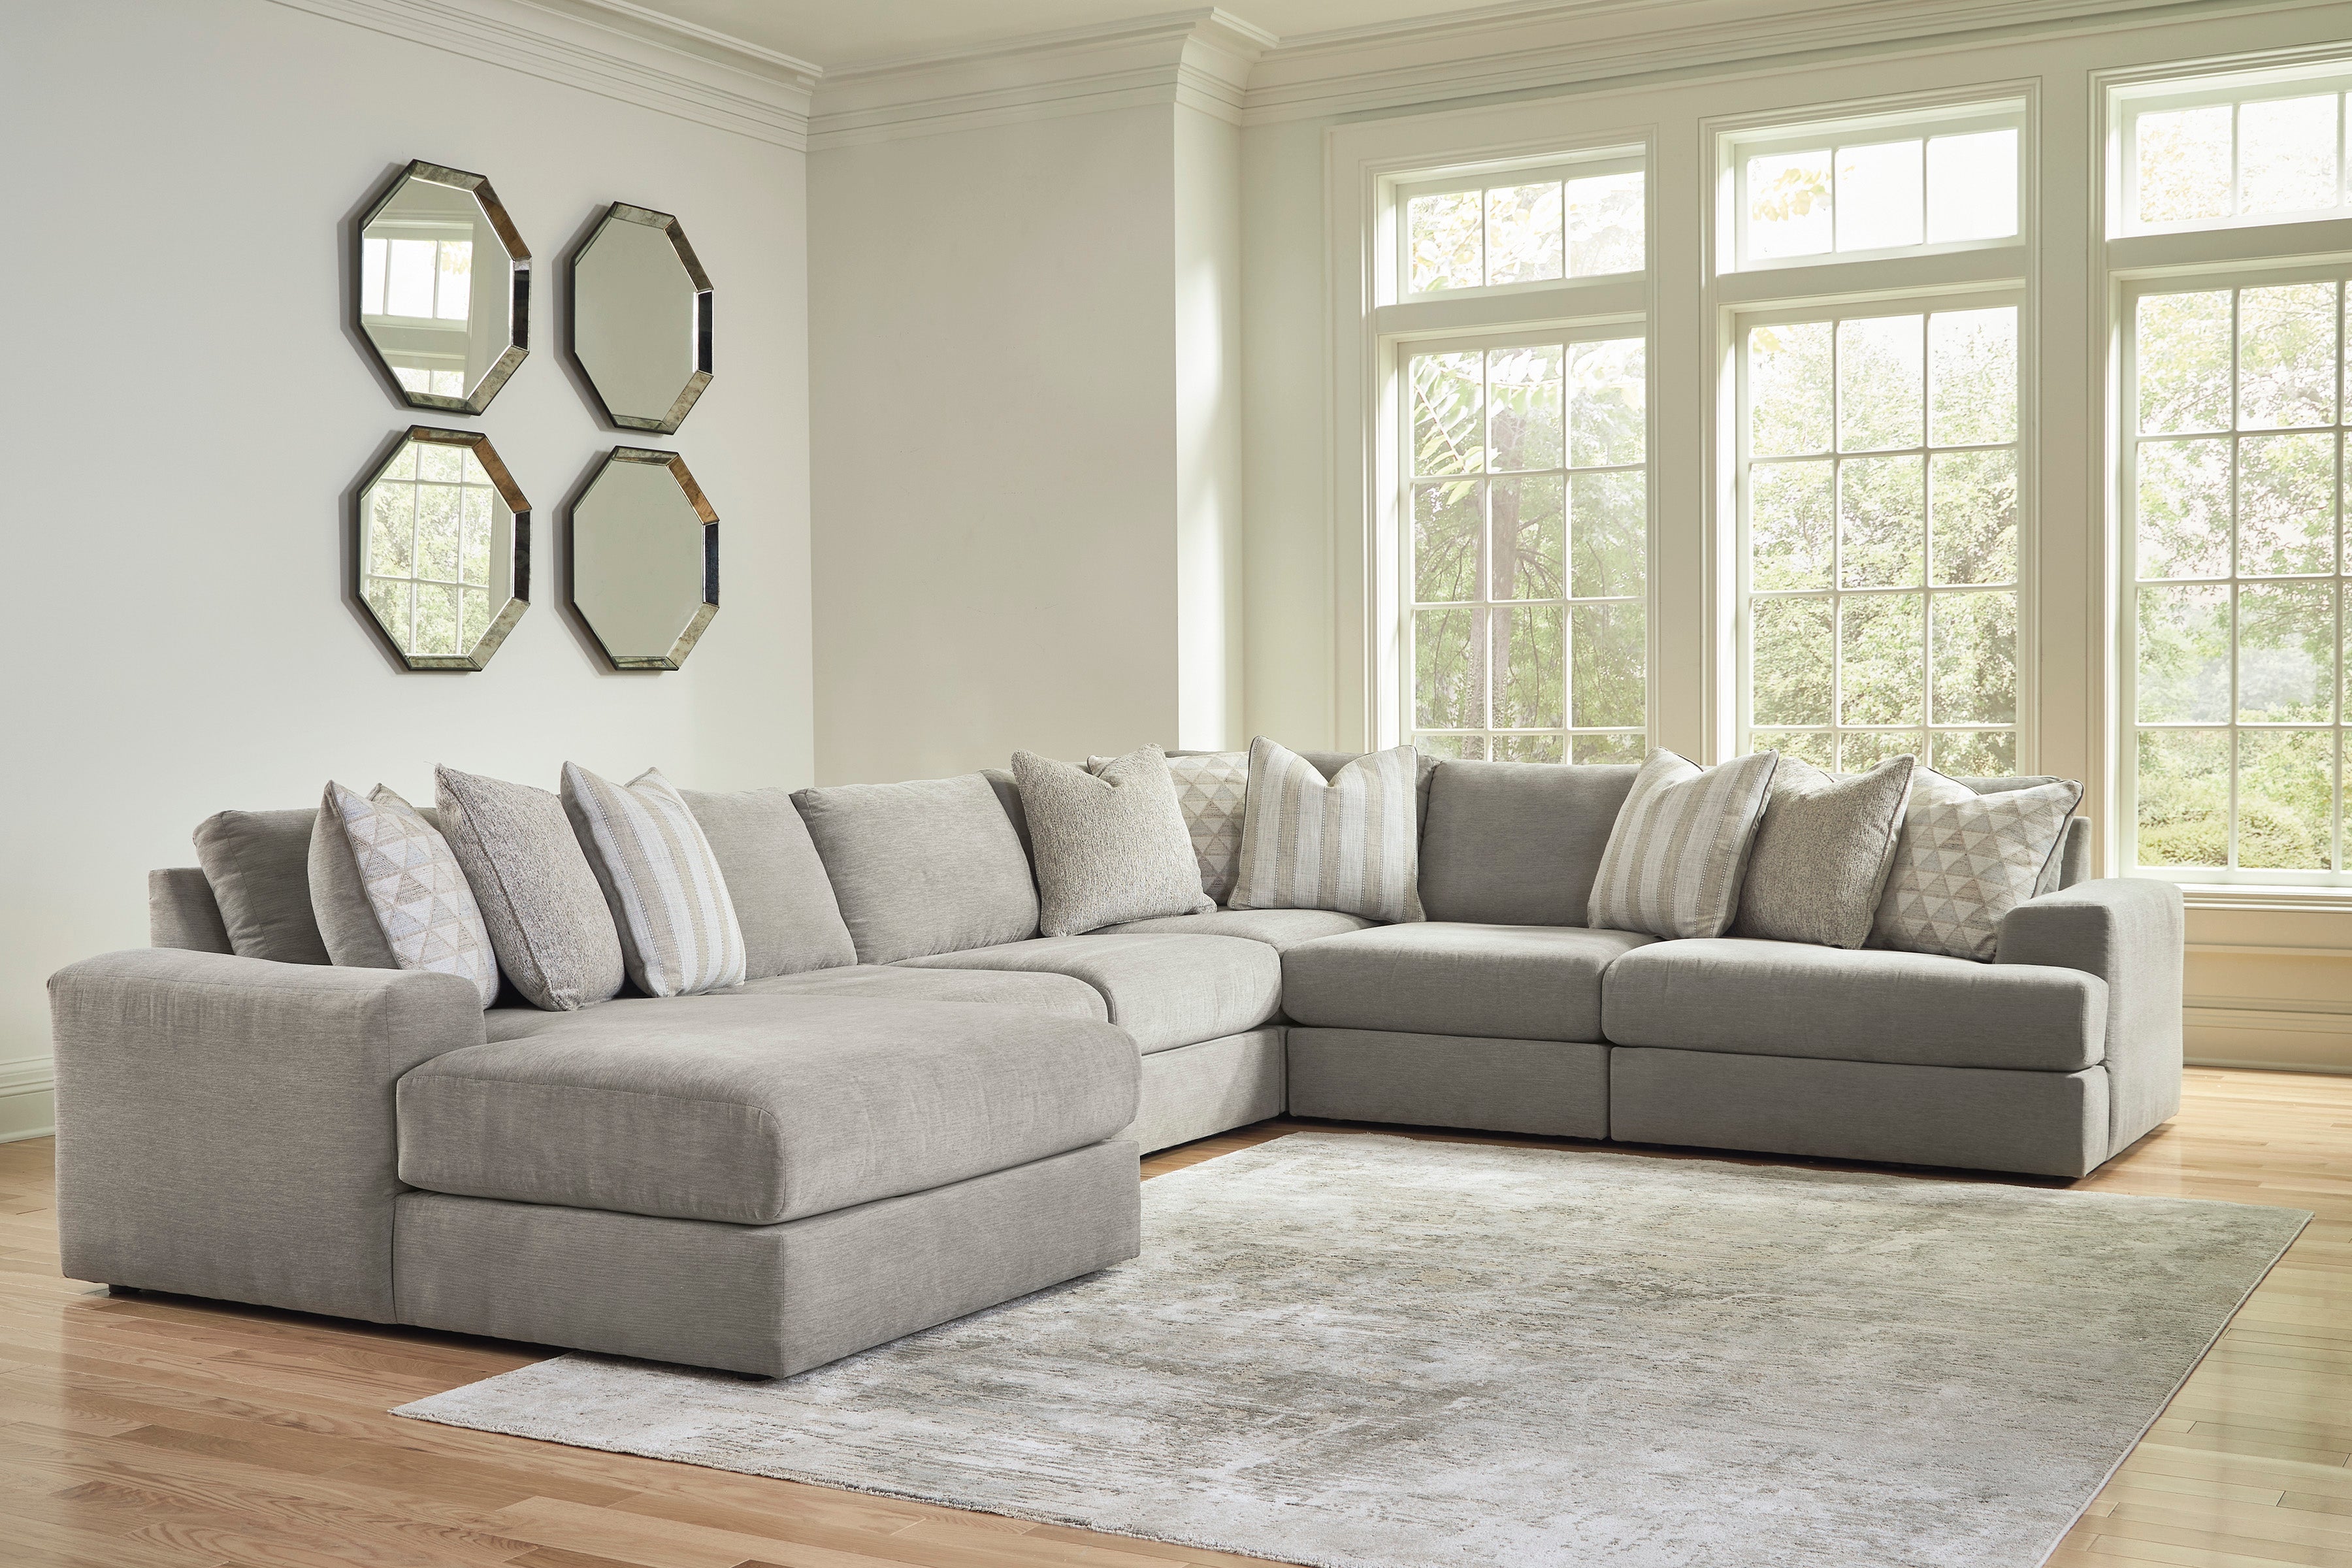 Avaliyah Ash 6-Piece LAF Chaise Sectional - SET | 5810316 | 5810346 | 5810346 | 5810346 | 5810377 | 5810365 - Bien Home Furniture &amp; Electronics